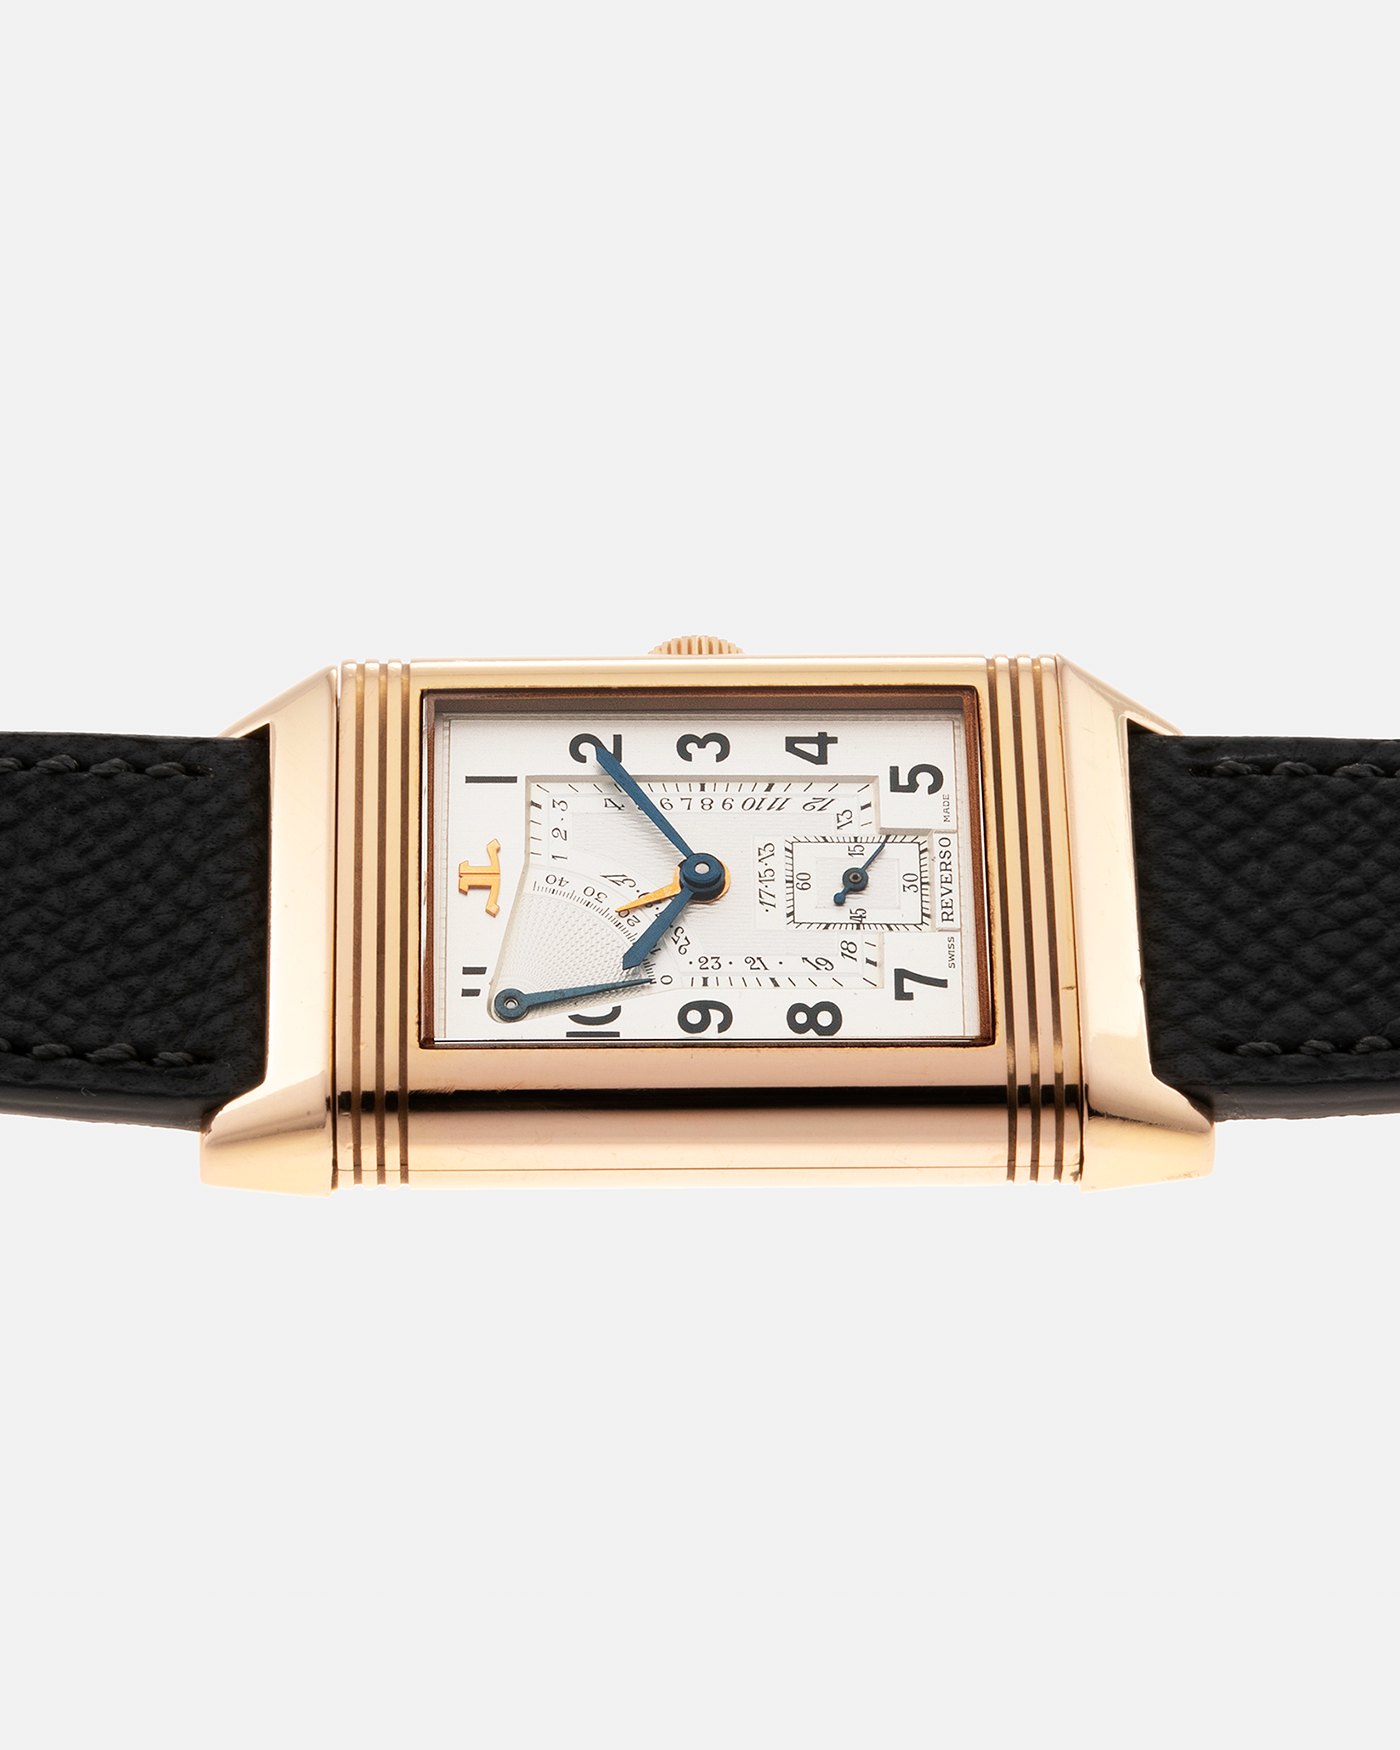 Brand: Jaeger LeCoultre Year: 1991 Model: Reverso Soixantième 60th Anniversary Ref. 270.2.64, Limited to 500 Pieces Reference: 270.2.64 Material: 18-carat Rose Gold Movement: JLC Cal. 824, Manual-Wind Case Diameter: 42mm x 26mm x 9.5mm Lug Width: 19mm Strap: Molequin Grey Textured Calf with Signed 18-carat Pink Gold Deployant Clasp